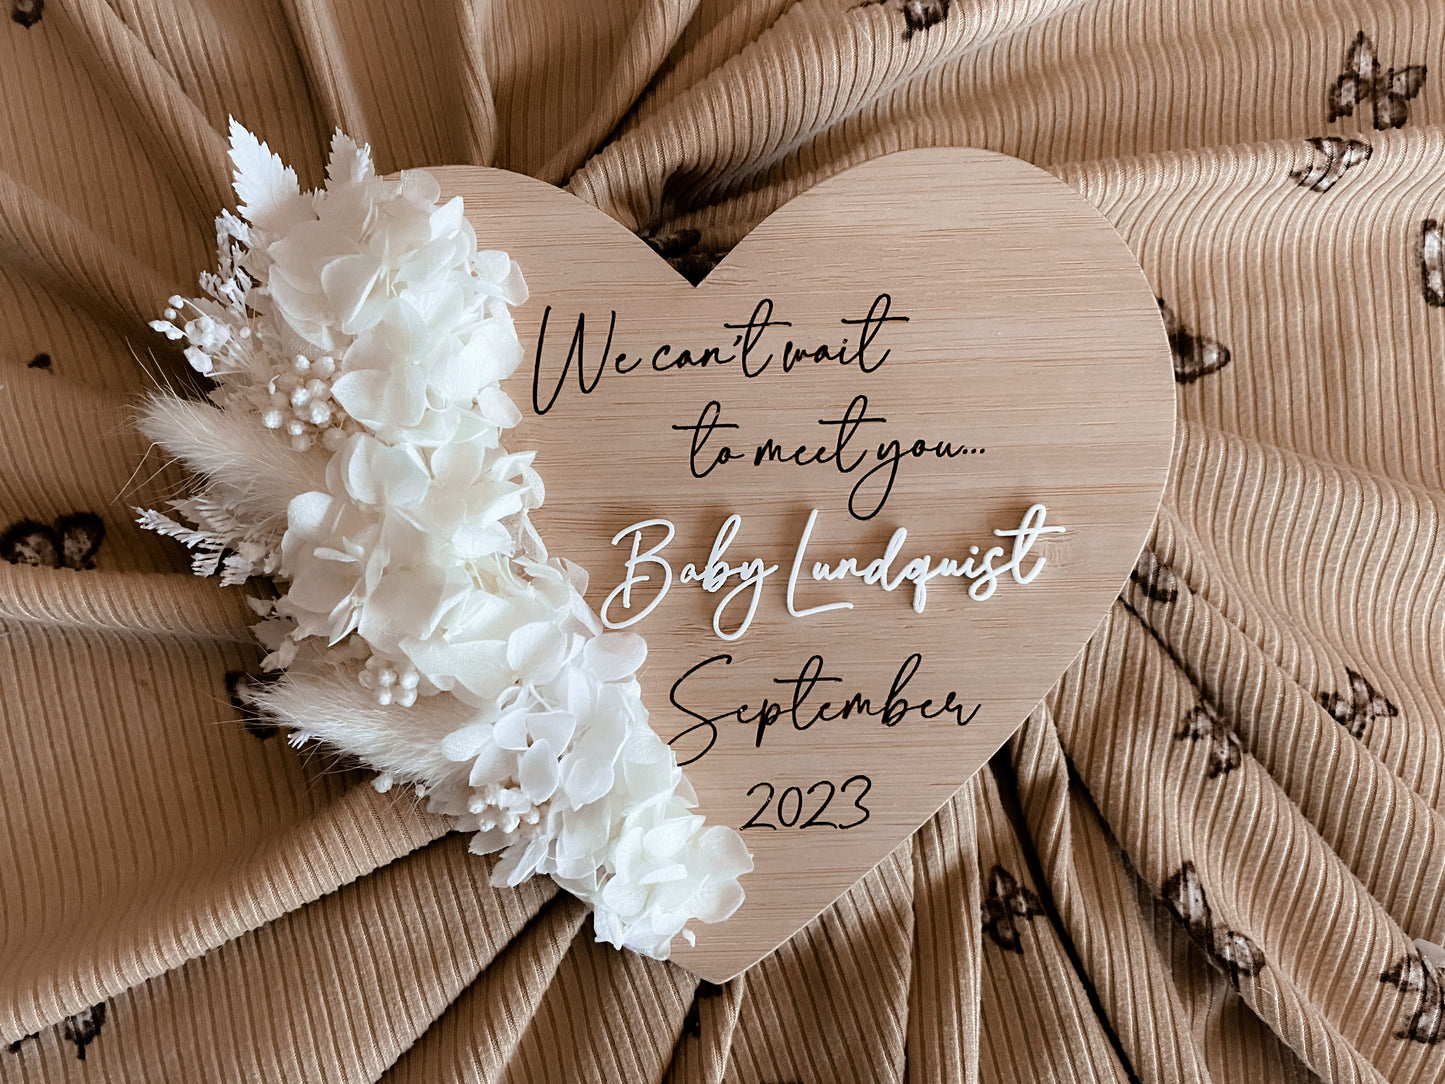 We can’t wait to meet you dried floral heart pregnancy announcement